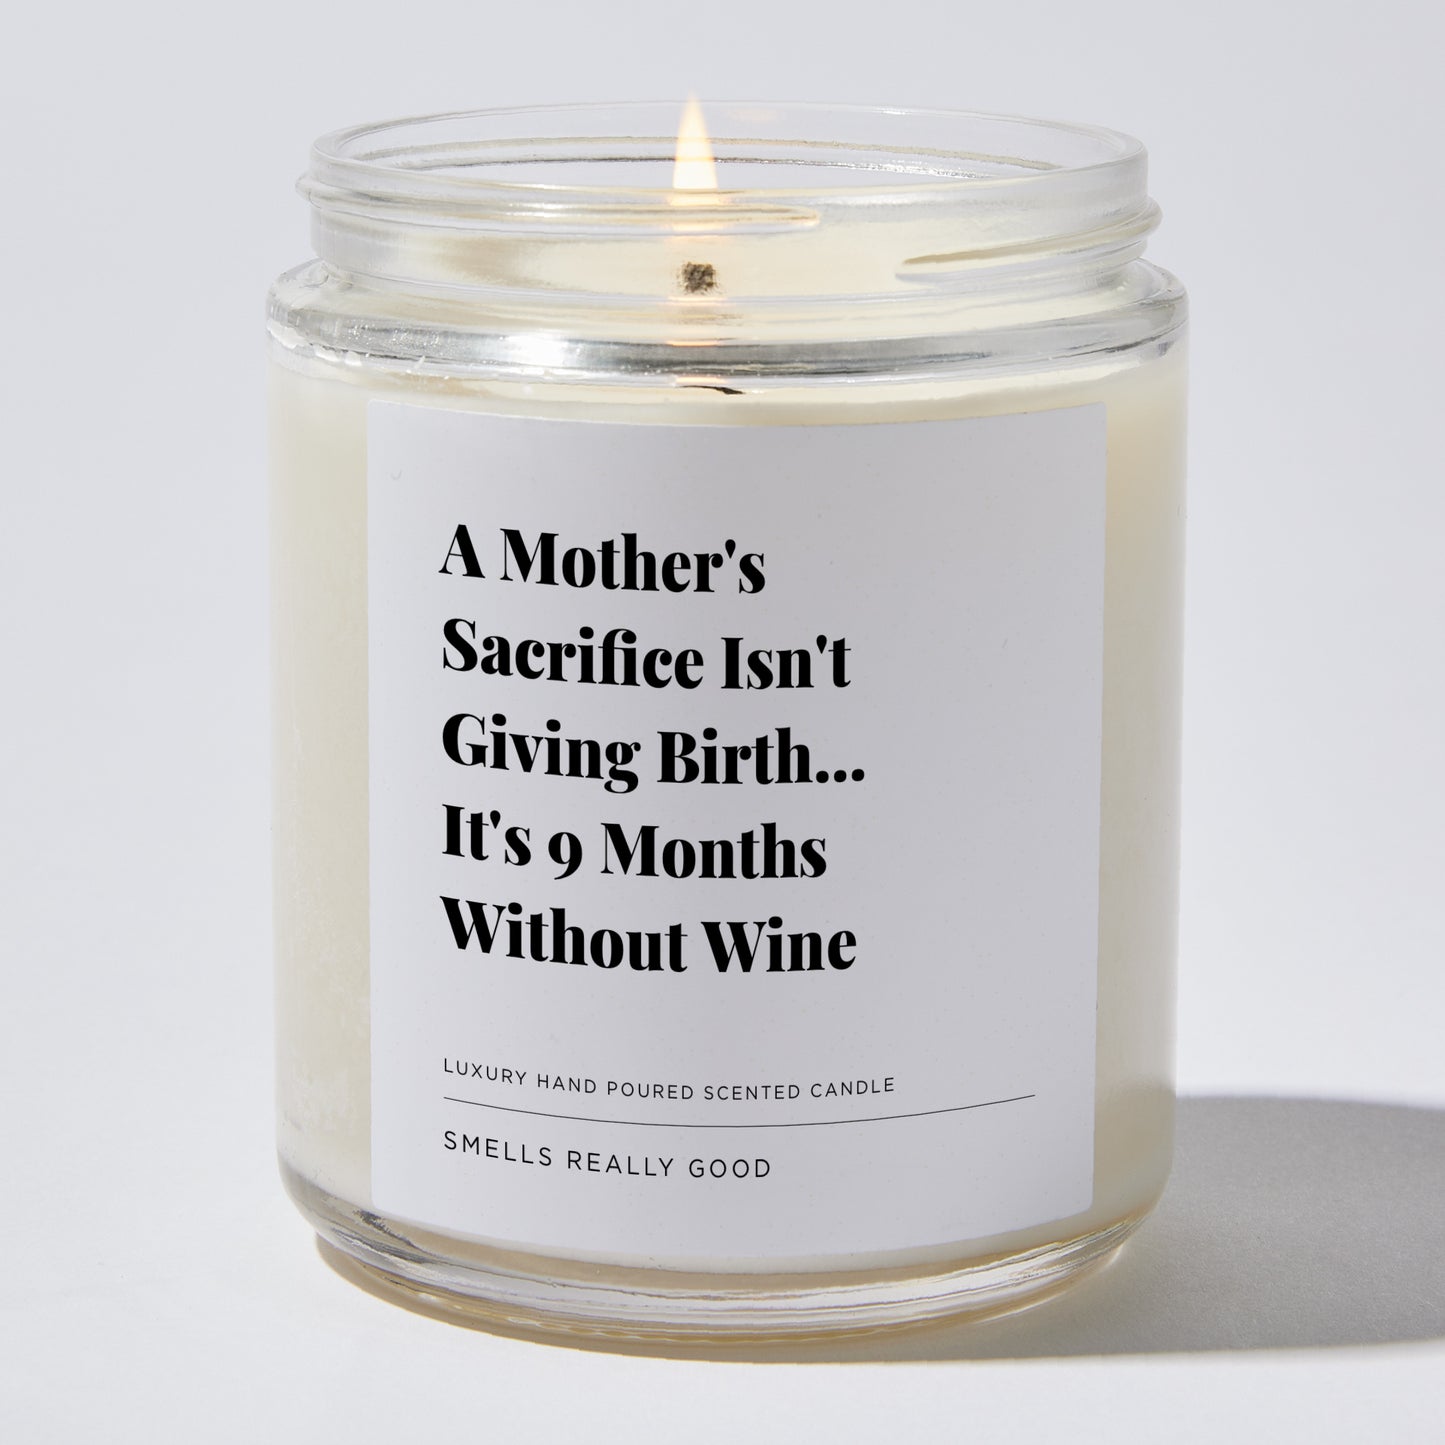 Gift for Mom - A Mother's Sacrifice Isn't Giving Birth... It's 9 Months Without Wine - Candle